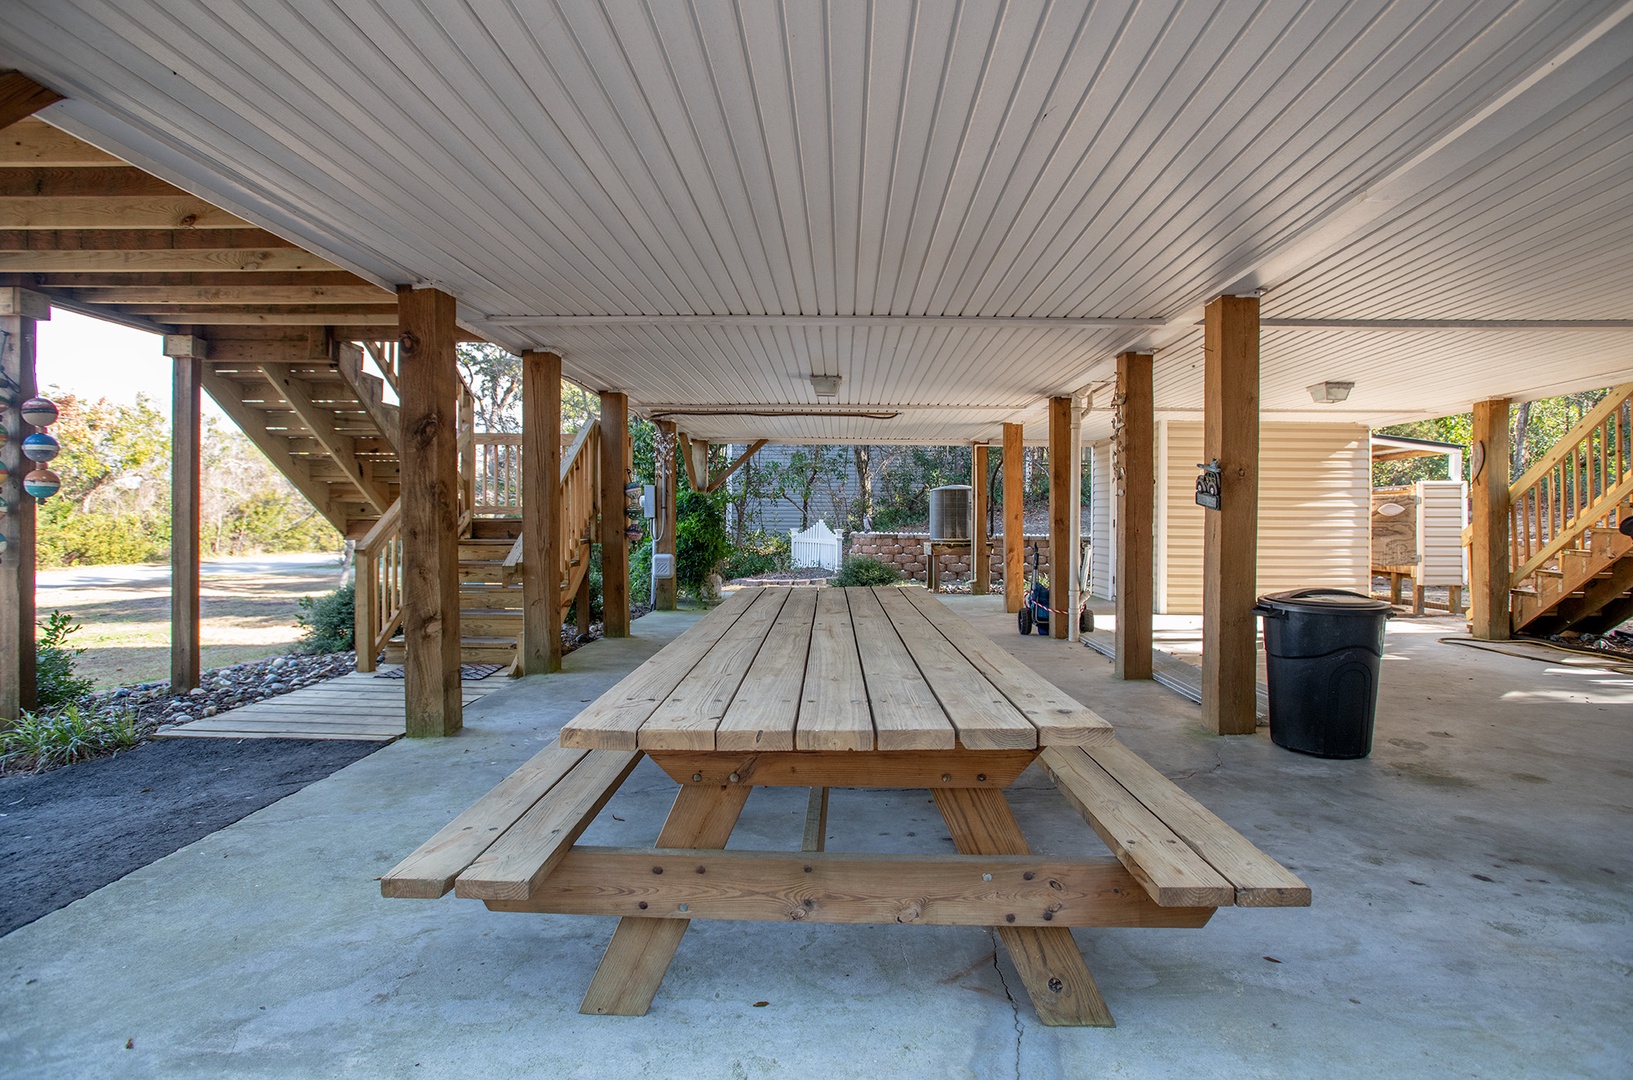 Outdoor Picnic Table for Al Fresco Dining